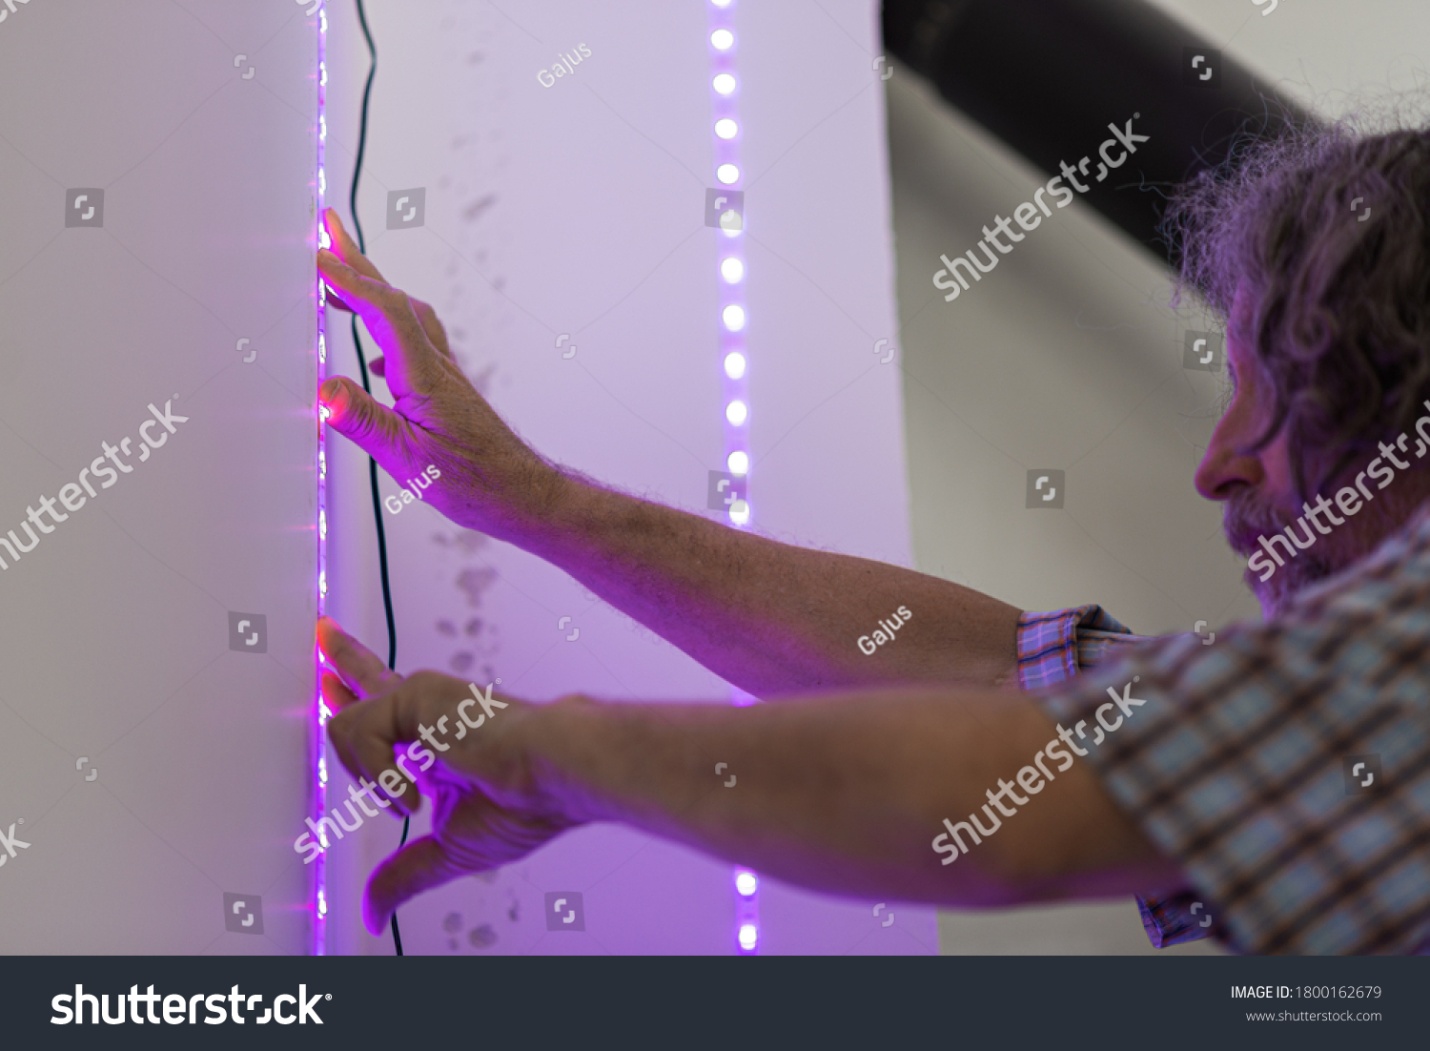 stock-photo-senior-male-electrician-placing-decorative-led-lights-stripe-on-a-wall-1800162679.jpg